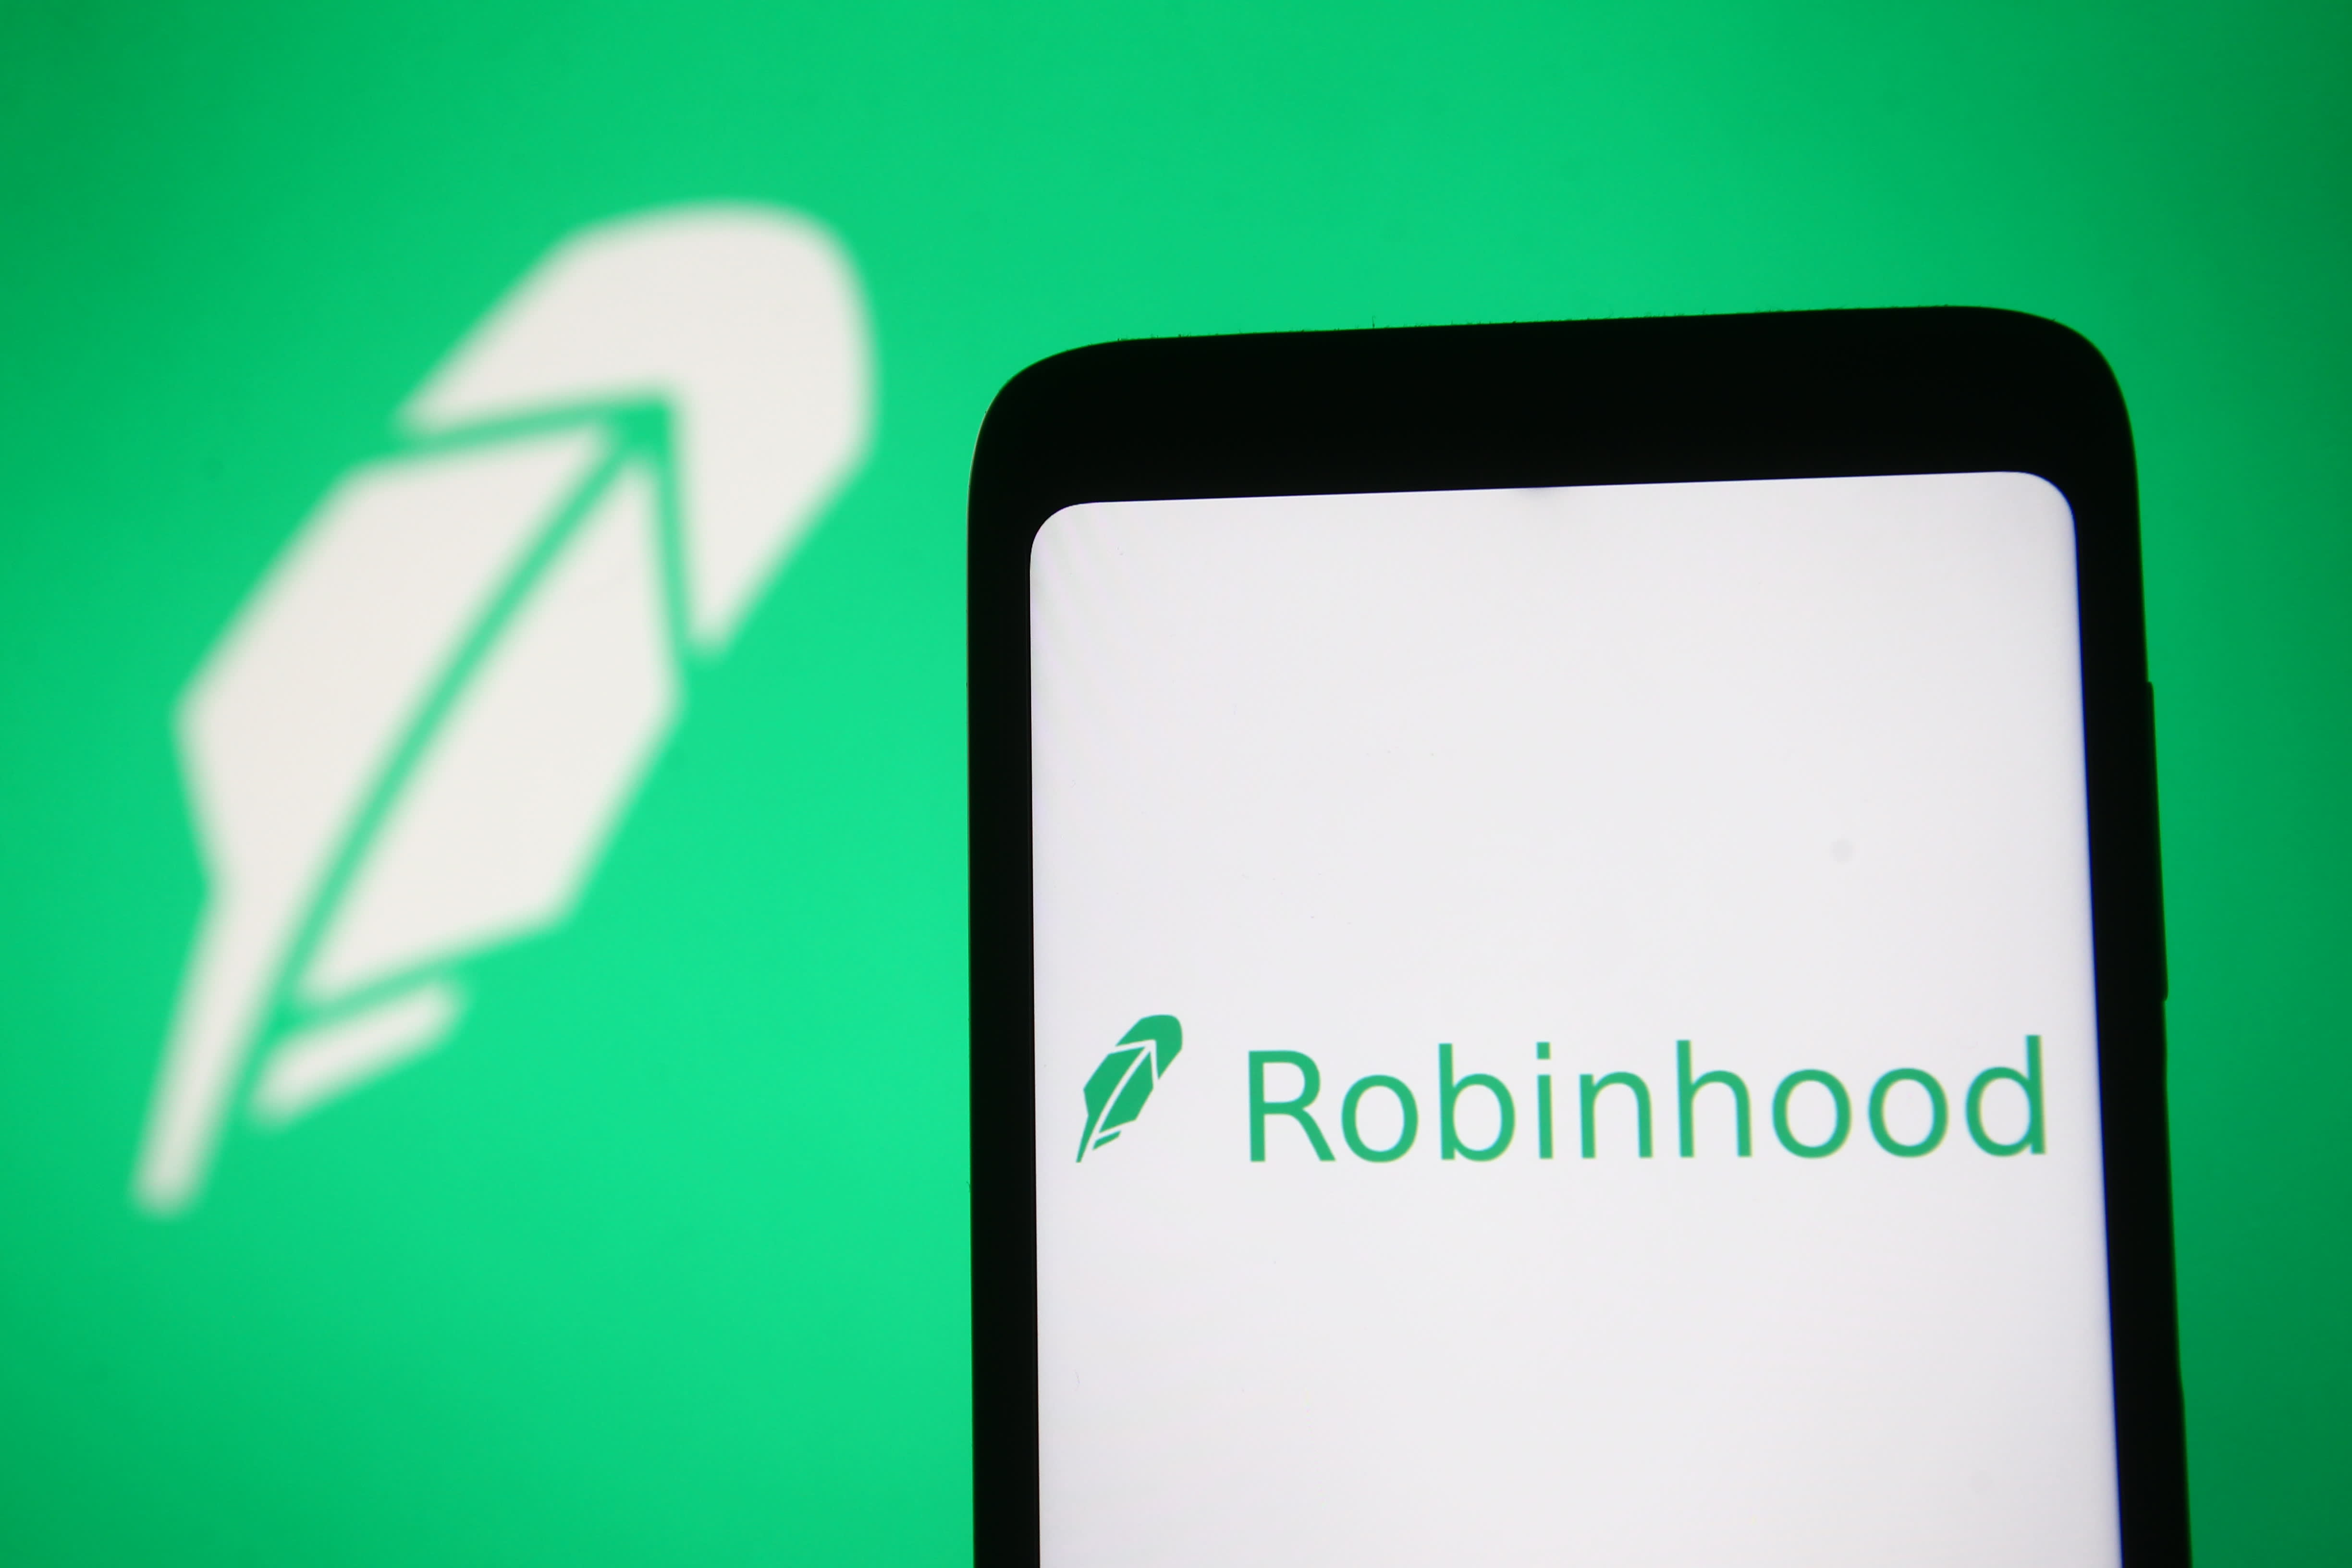 Robinhood raked in $331 million from clients' trading activity during the first quarter